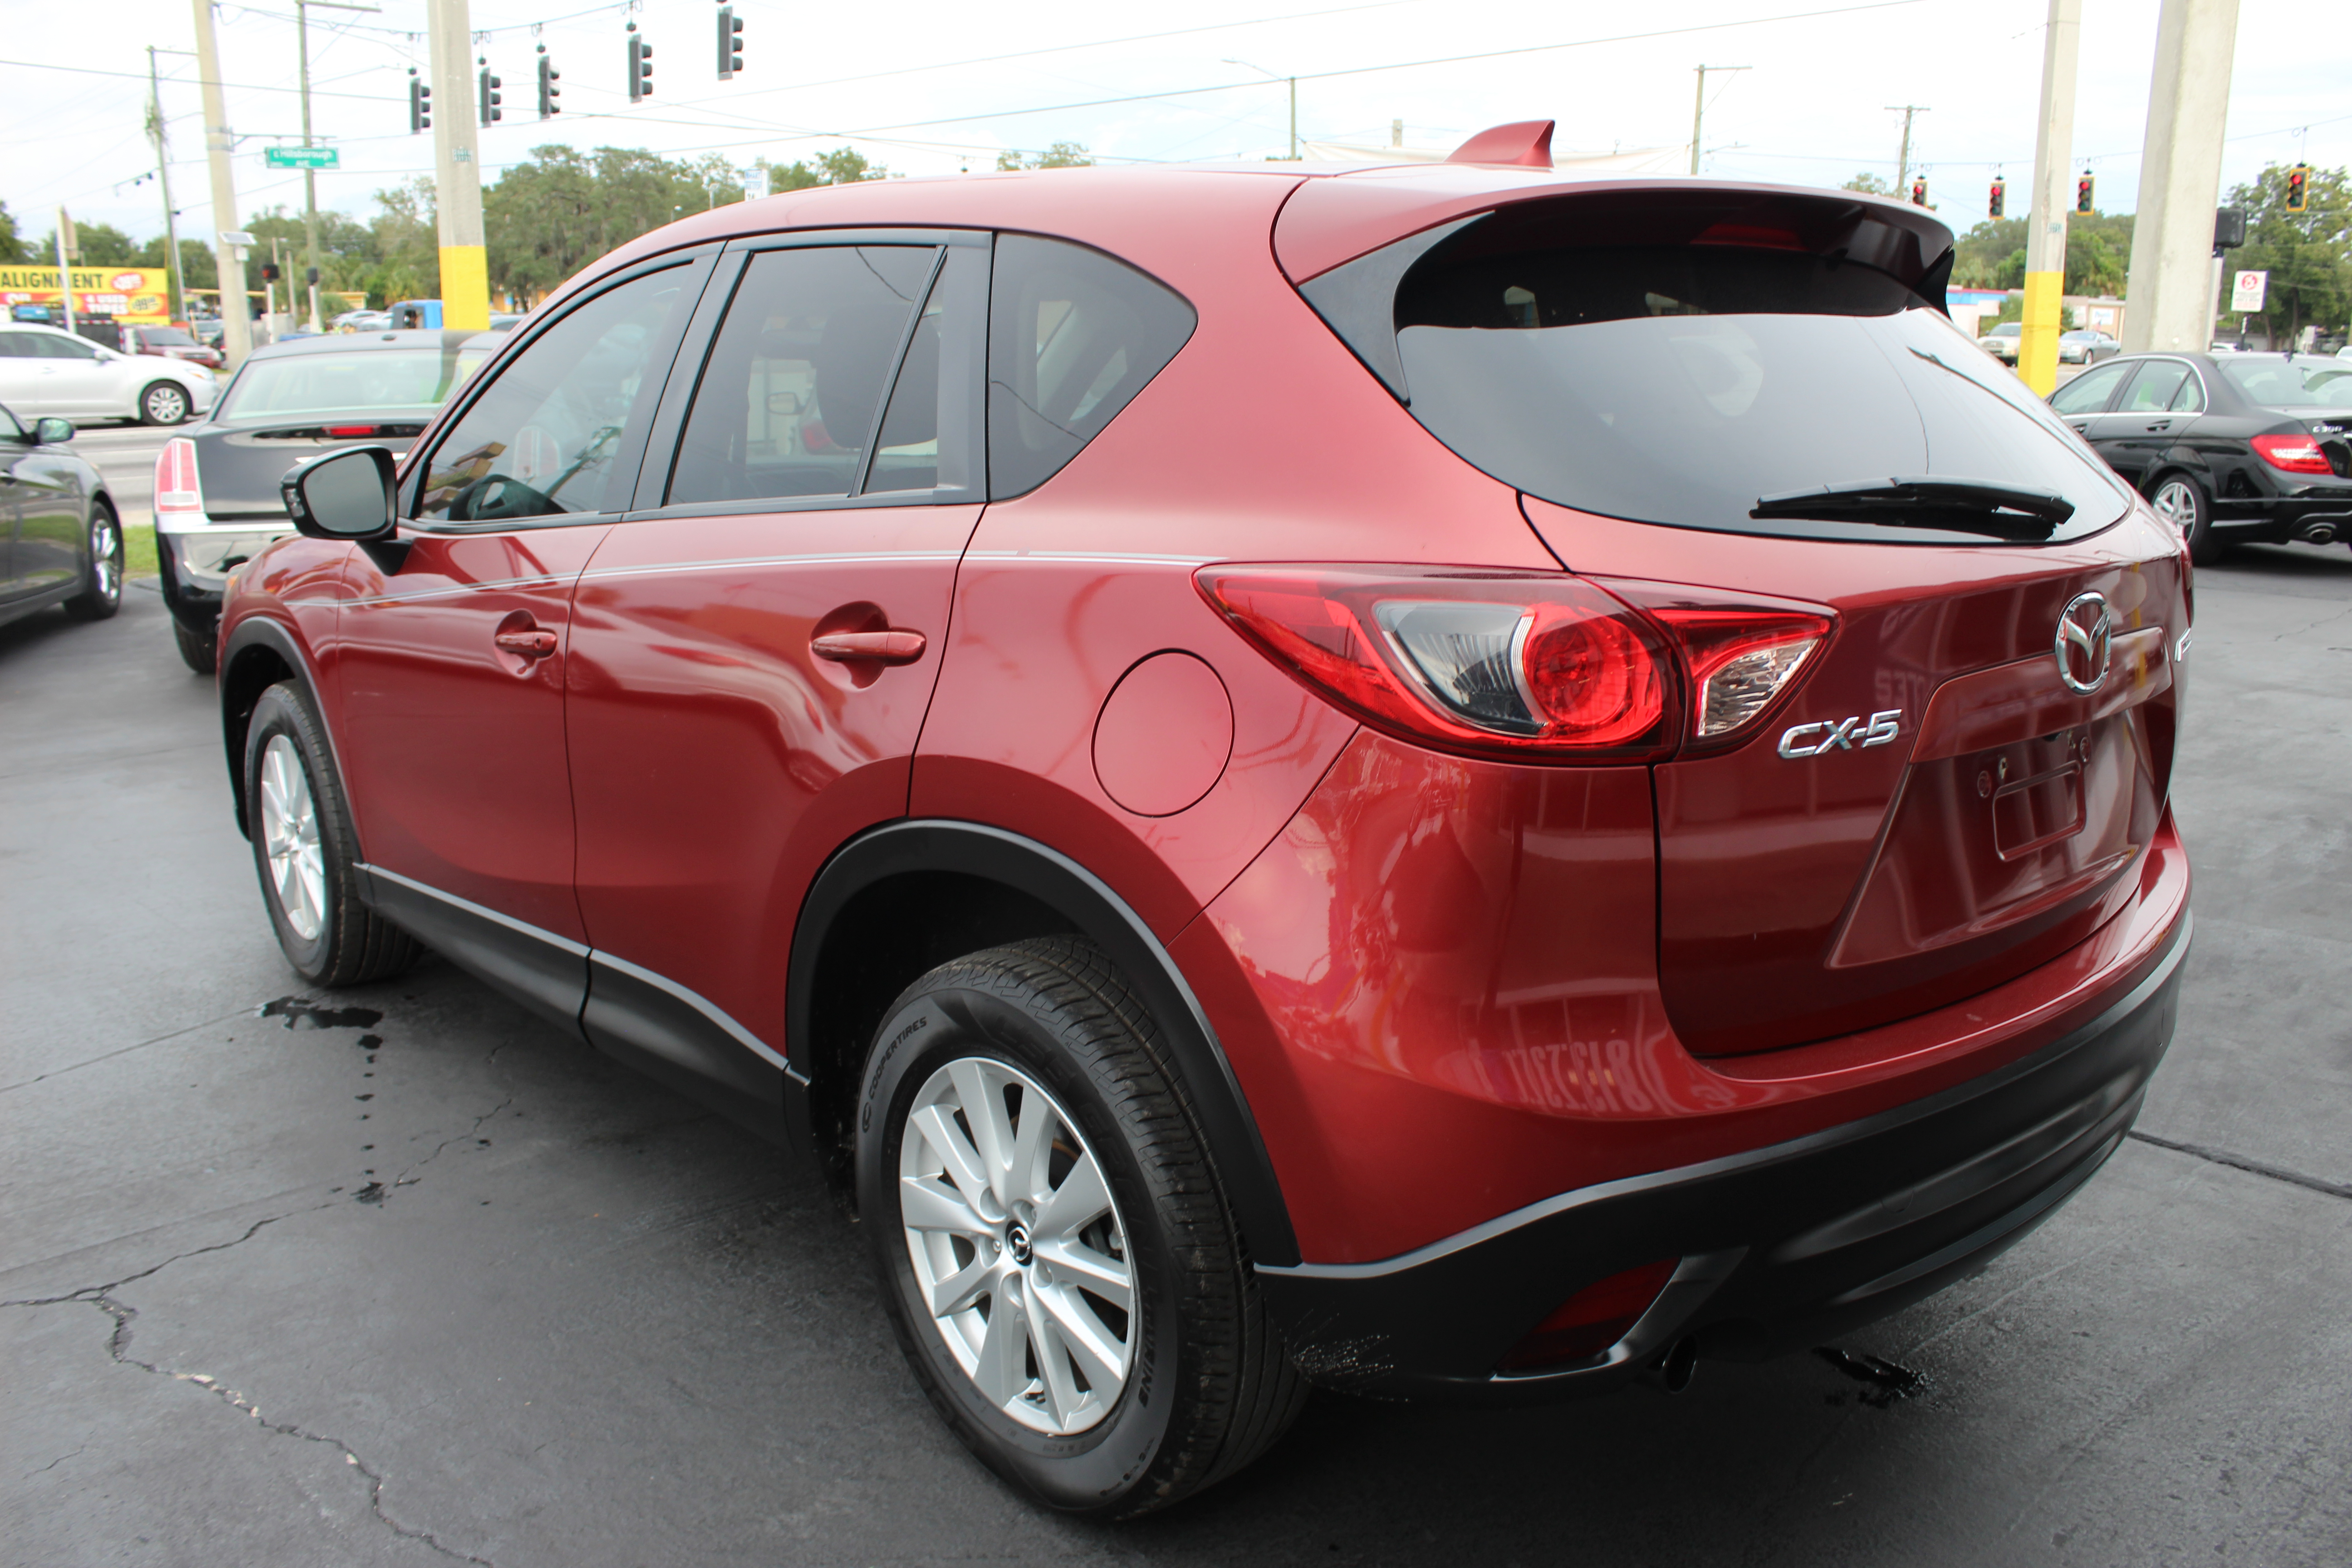 Pre-Owned 2013 Mazda CX-5 Touring Wagon 4 Dr. in Tampa ...